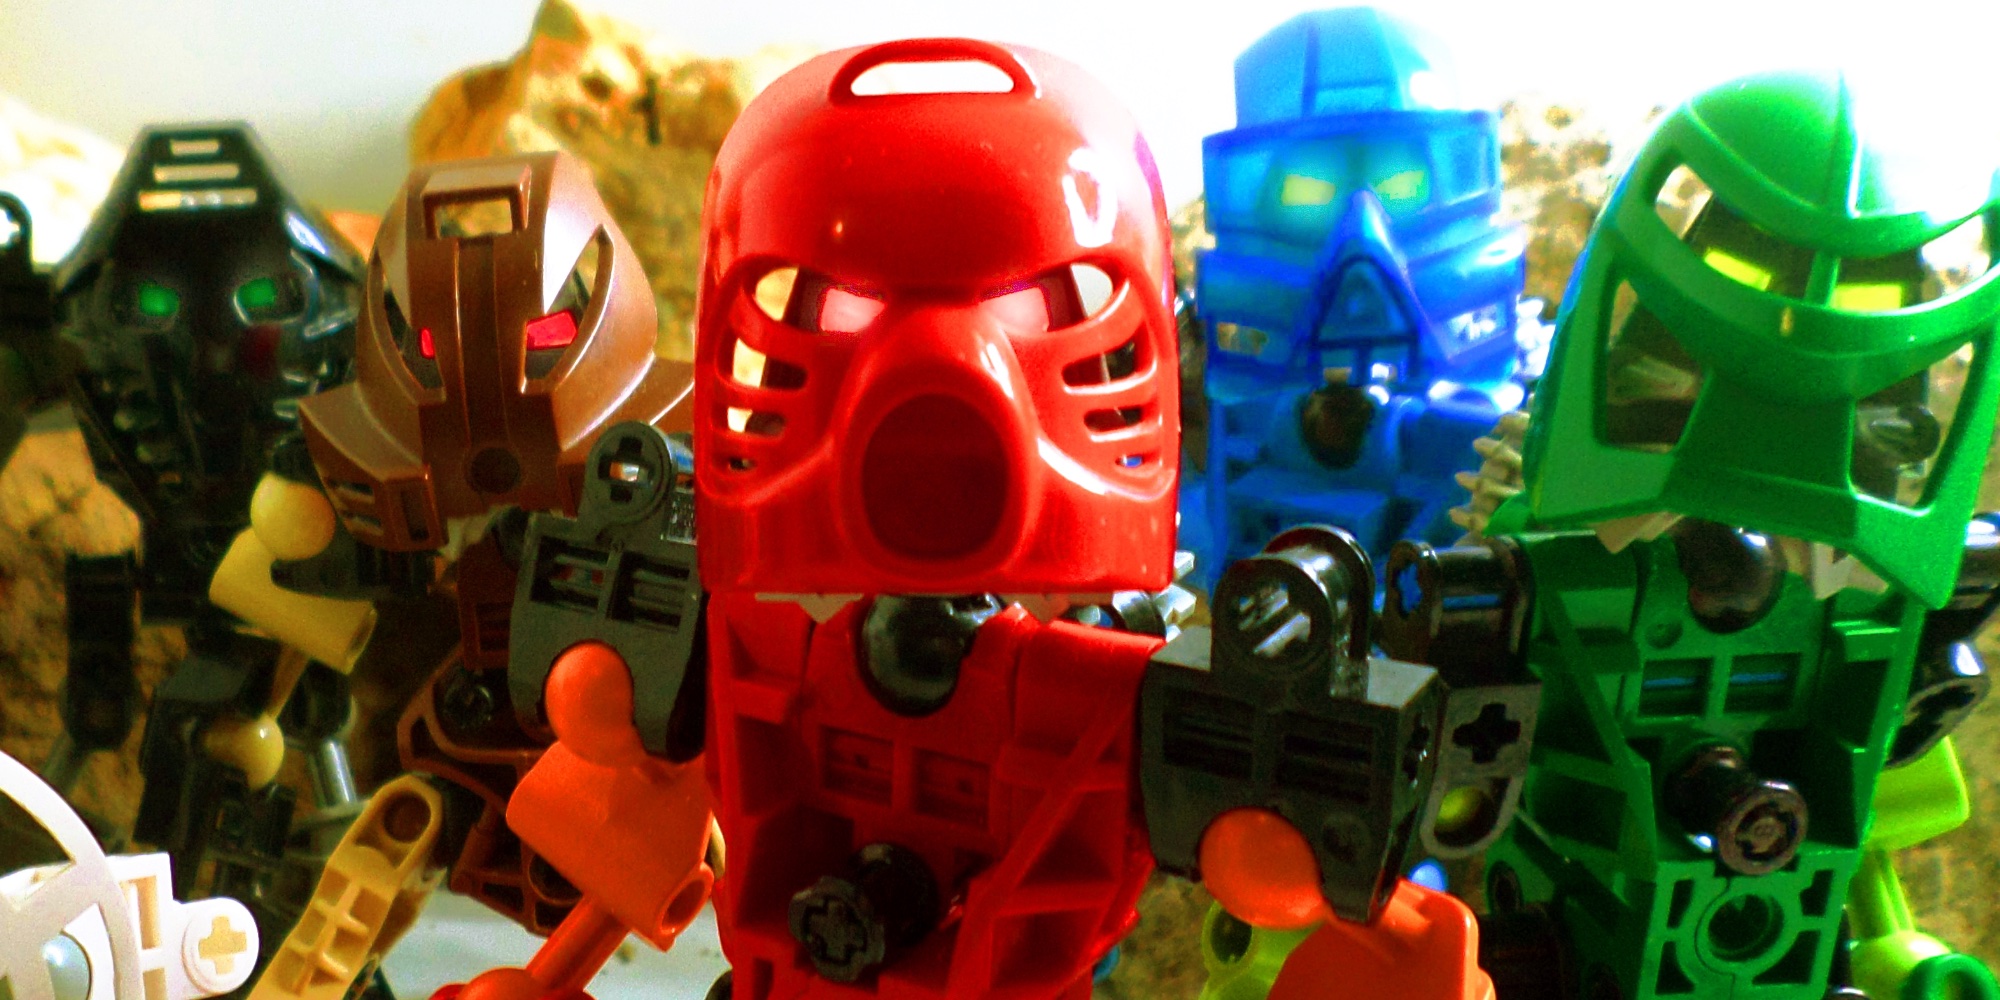 LEGO Vault promotional kits set to feature BIONICLE and more